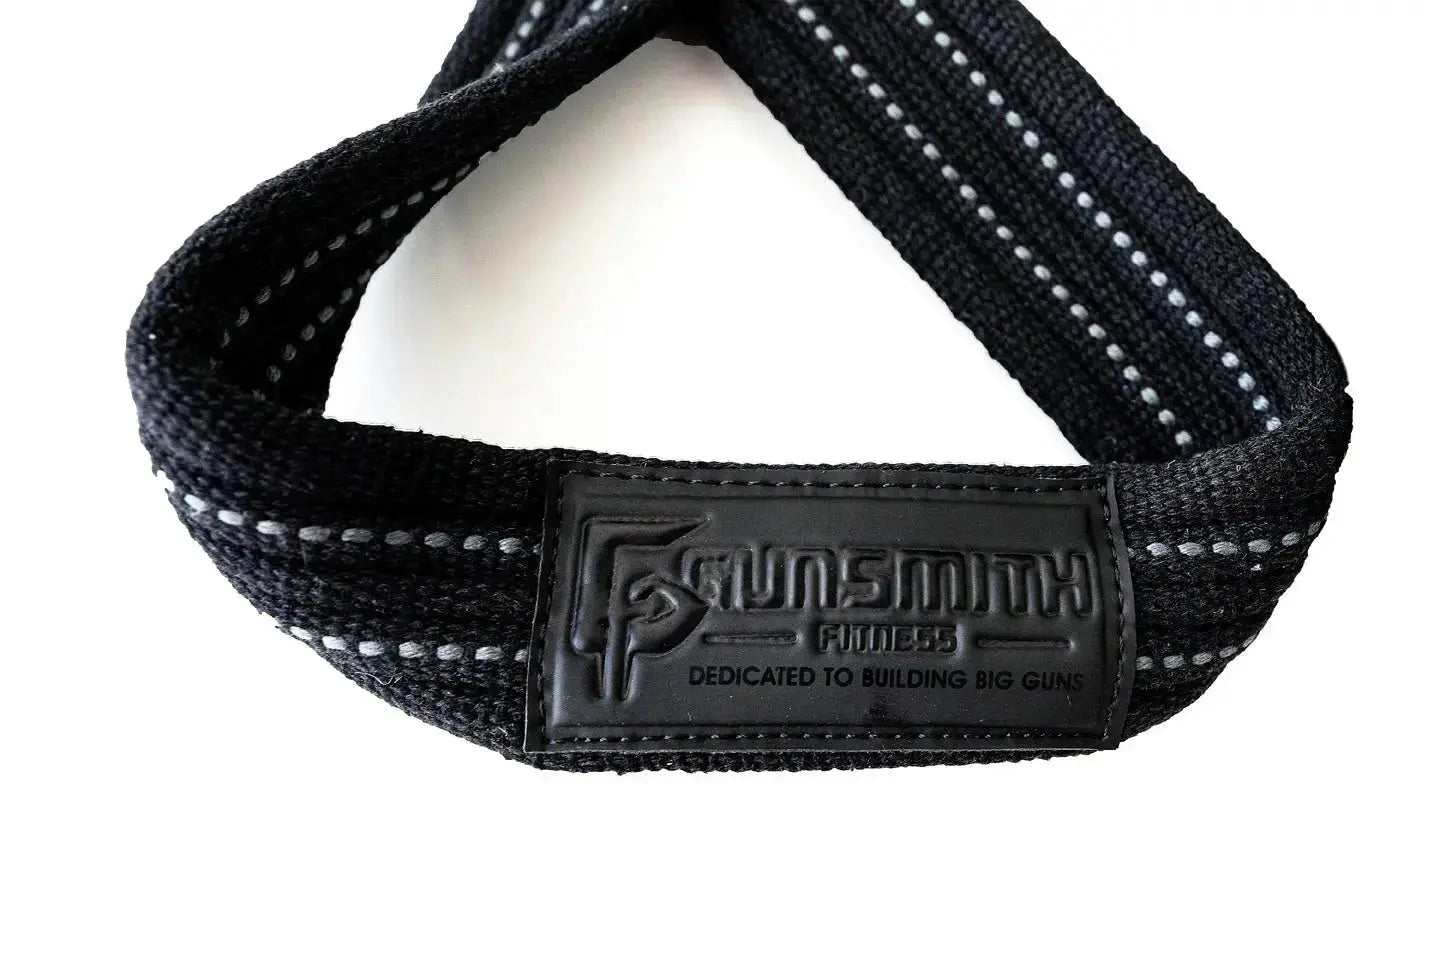 Get Your Figure 8 Lifting Straps - Gunsmith Fitness